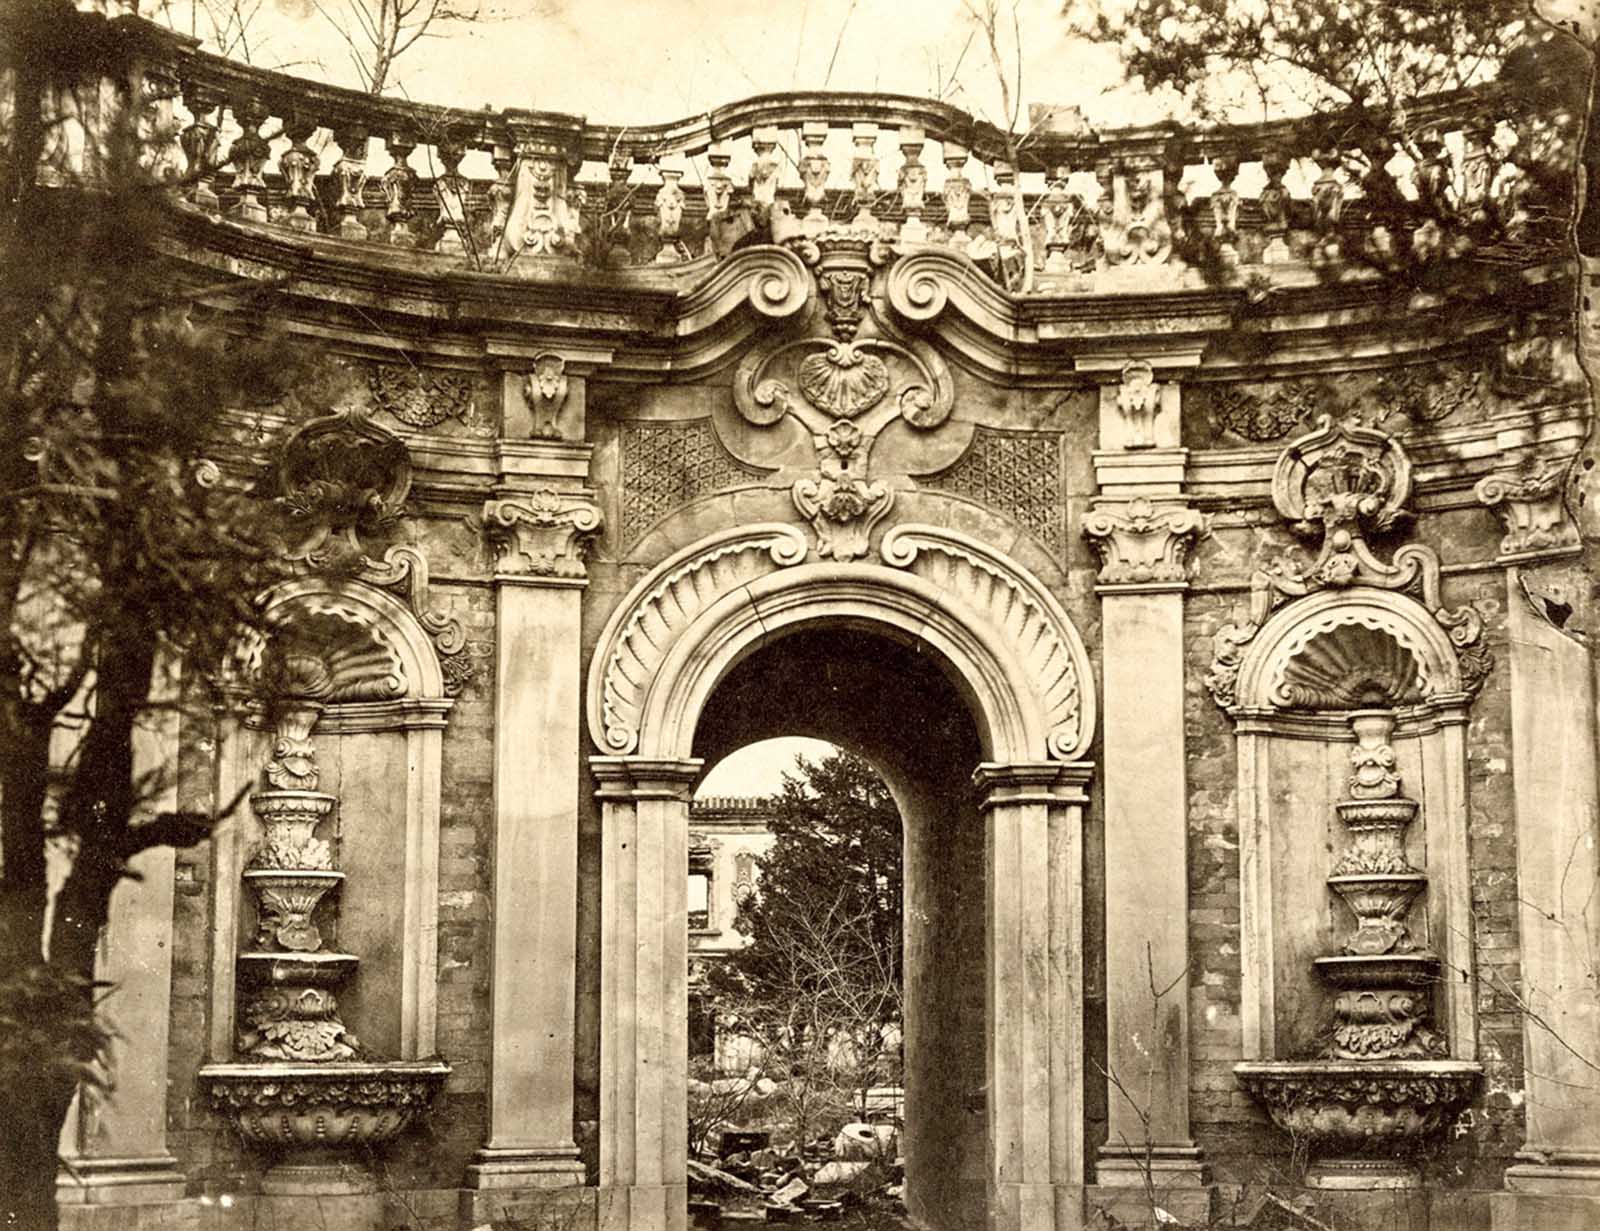 A view of the Fountain Gate in Yuan Ming Yuan, or the Garden of Perfect Brightness. Beginning in 1709, the Qing emperor Kangxi began the construction of this garden retreat, which was modeled on the grand palaces, gardens, and fountains of Europe. Much of Yuan Ming Yuan was destroyed in the Second Opium War.